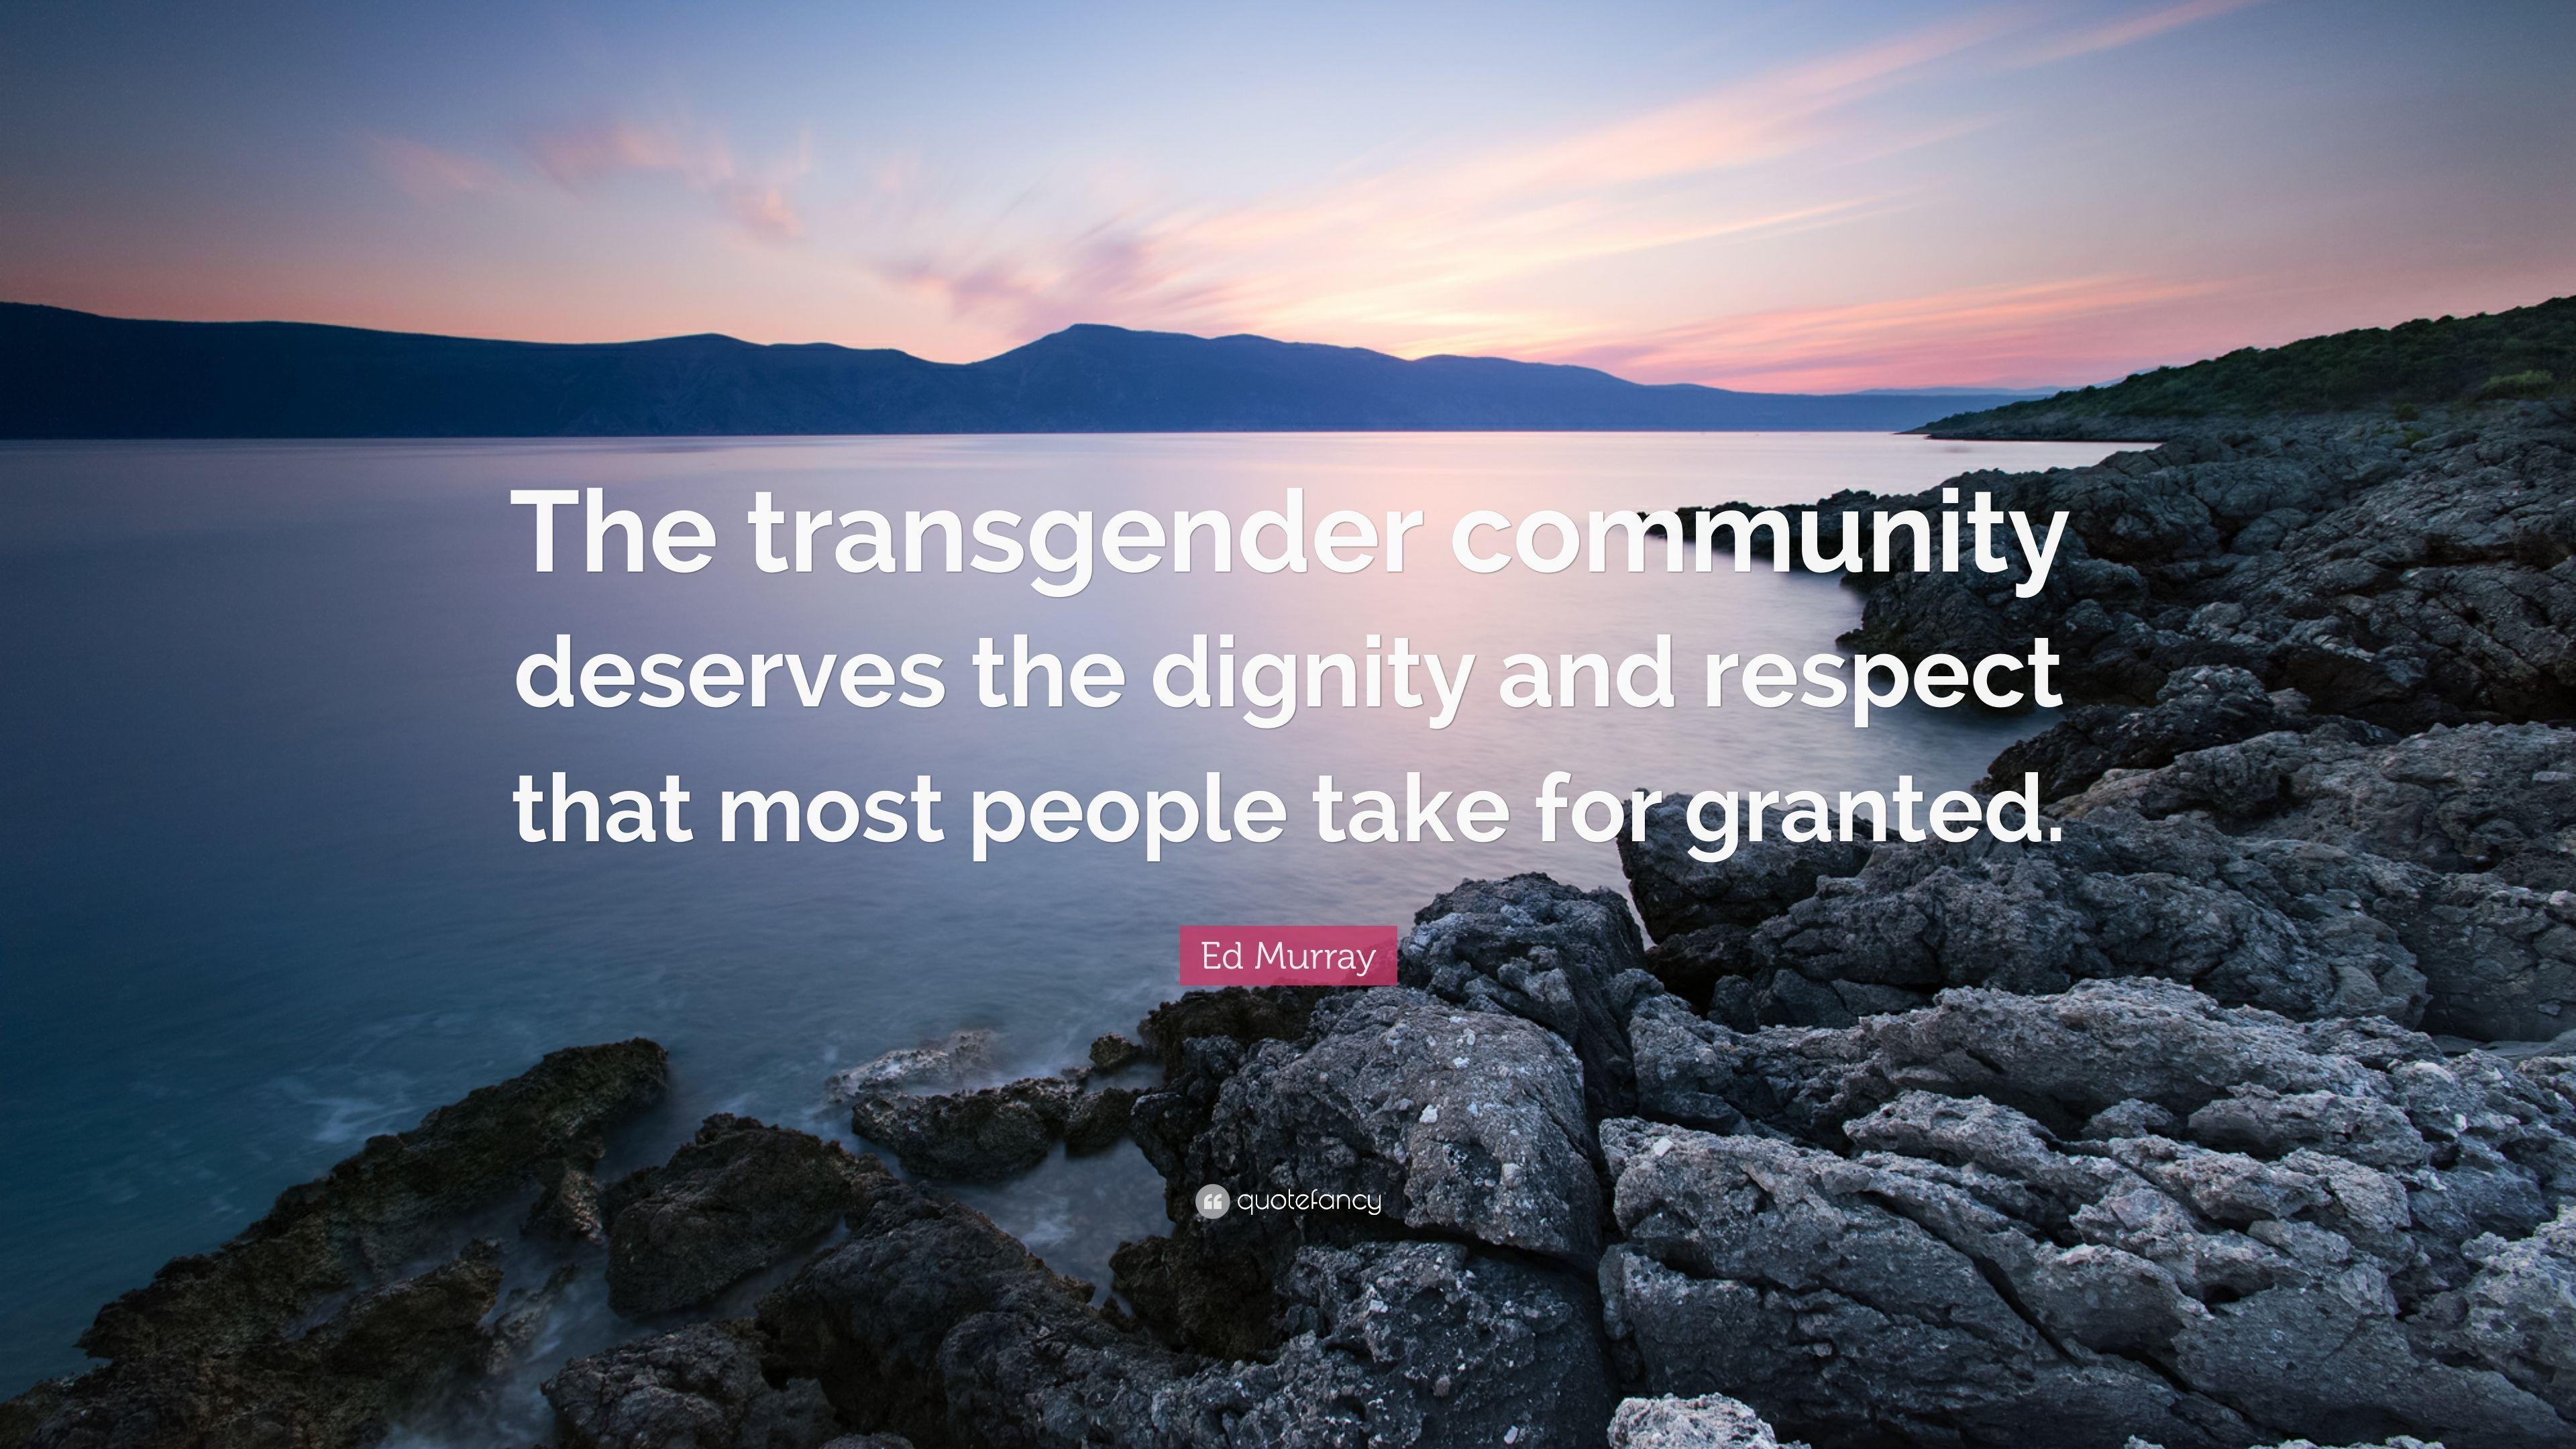 Ed Murray Quote: “The transgender community deserves the dignity